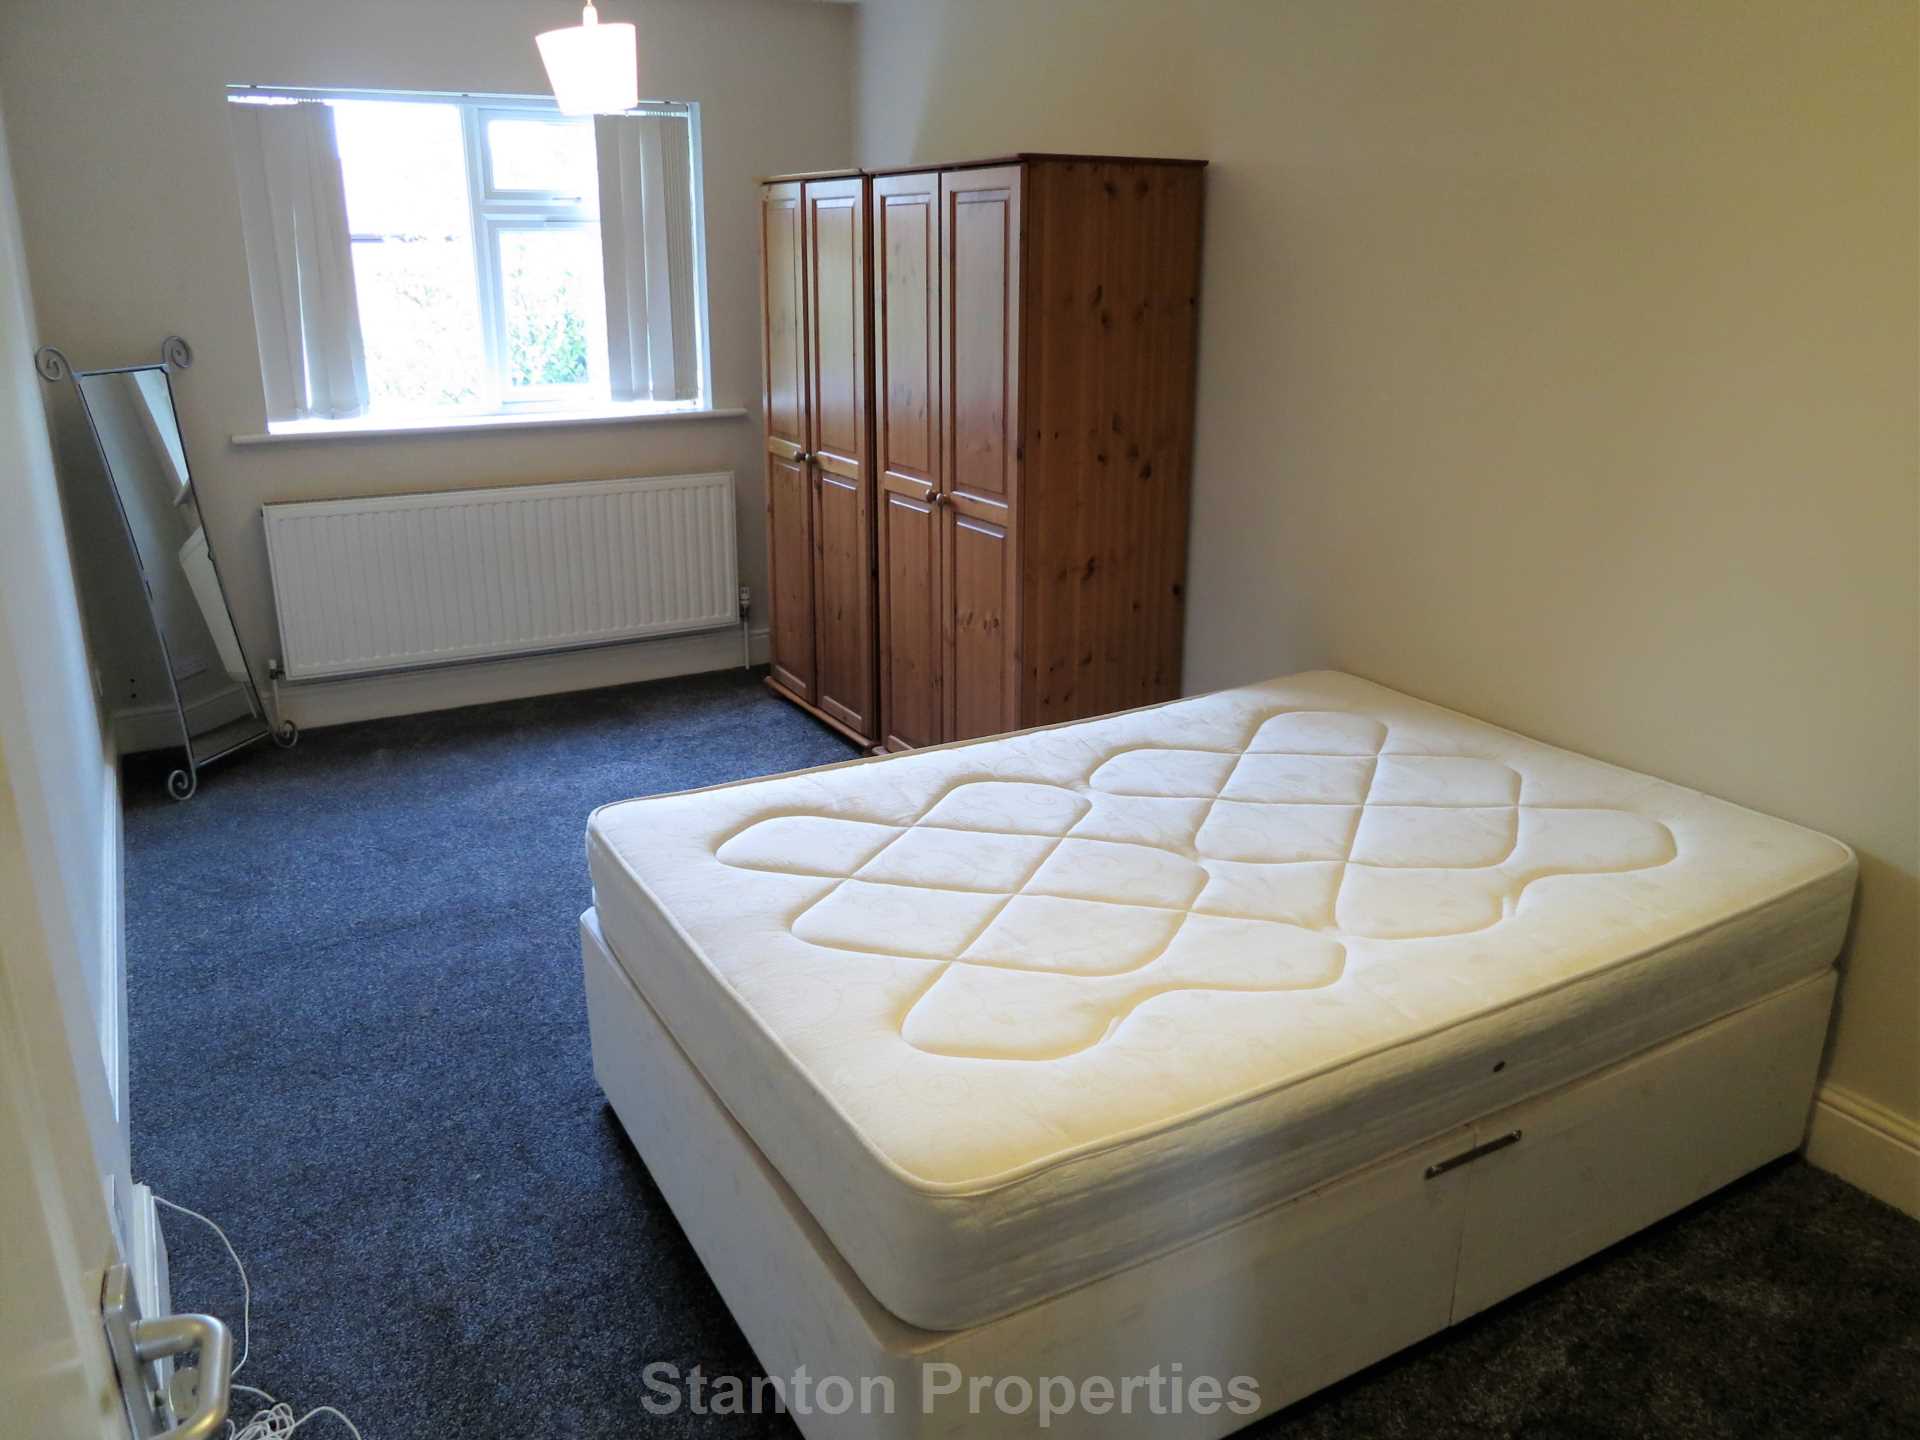 See Video Tour, £135 pppw, Brocklebank Road, Fallowfield, Image 10